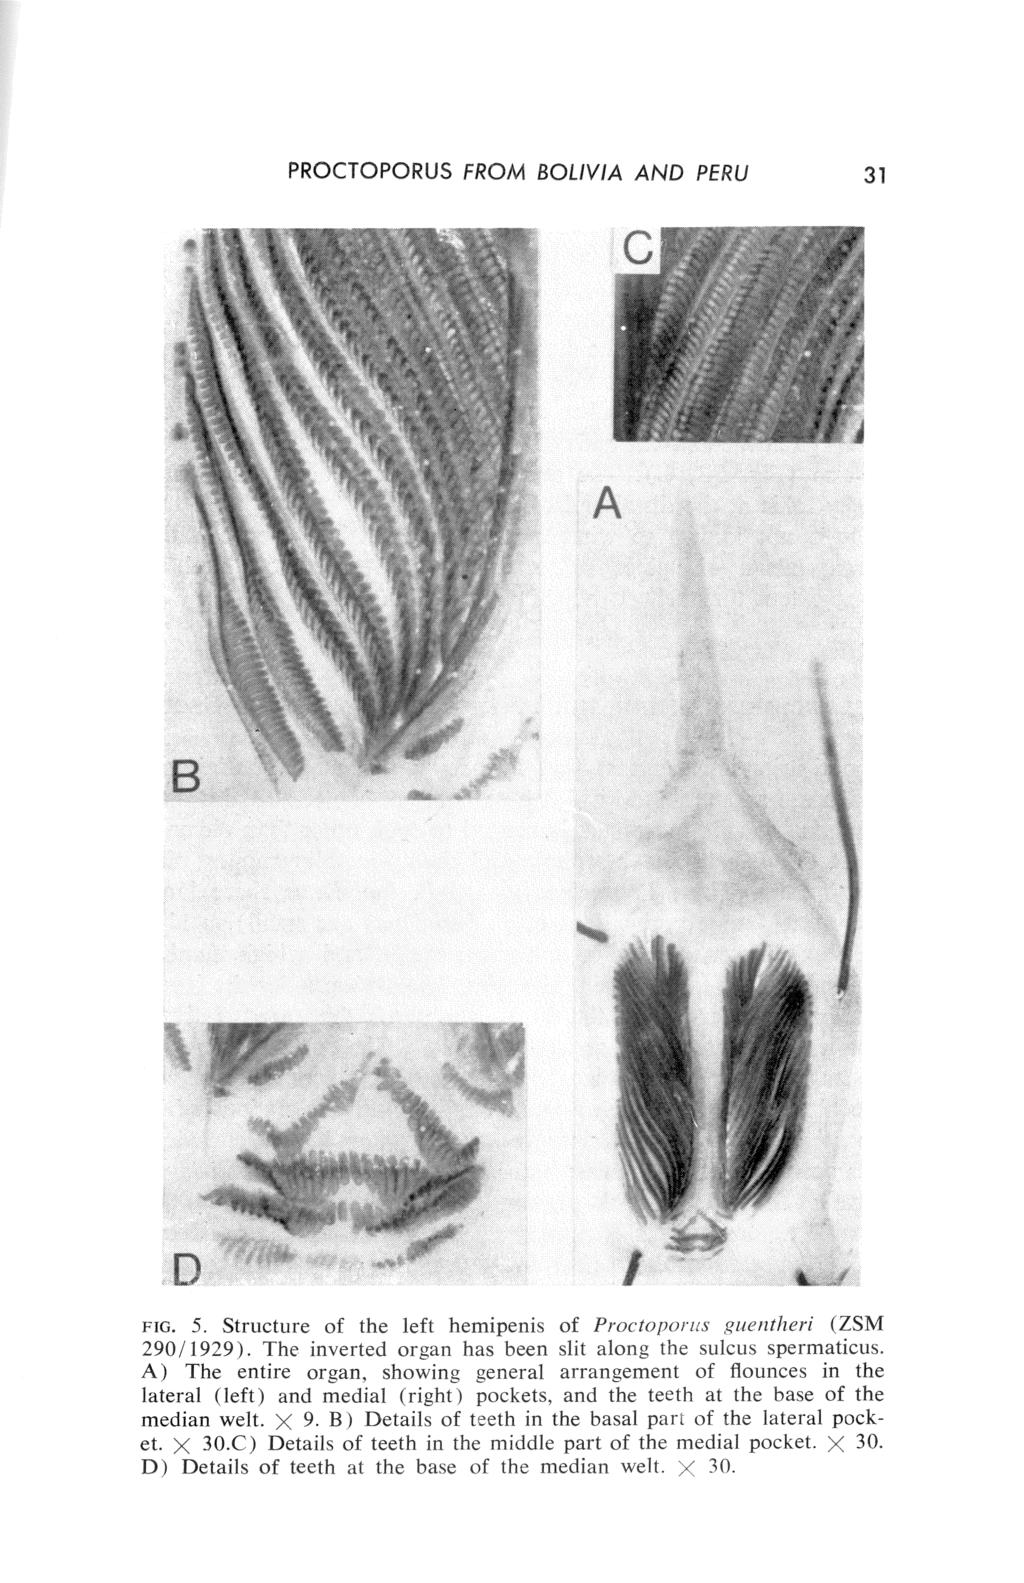 PROCTOPORUS FROM BOLIVIA AND PERU 31 FIG. 5. Structure of the left hemipenis of Proctoporus guentheri (ZSM 290/1929). The inverted organ has been slit along the sulcus spermatfcus.